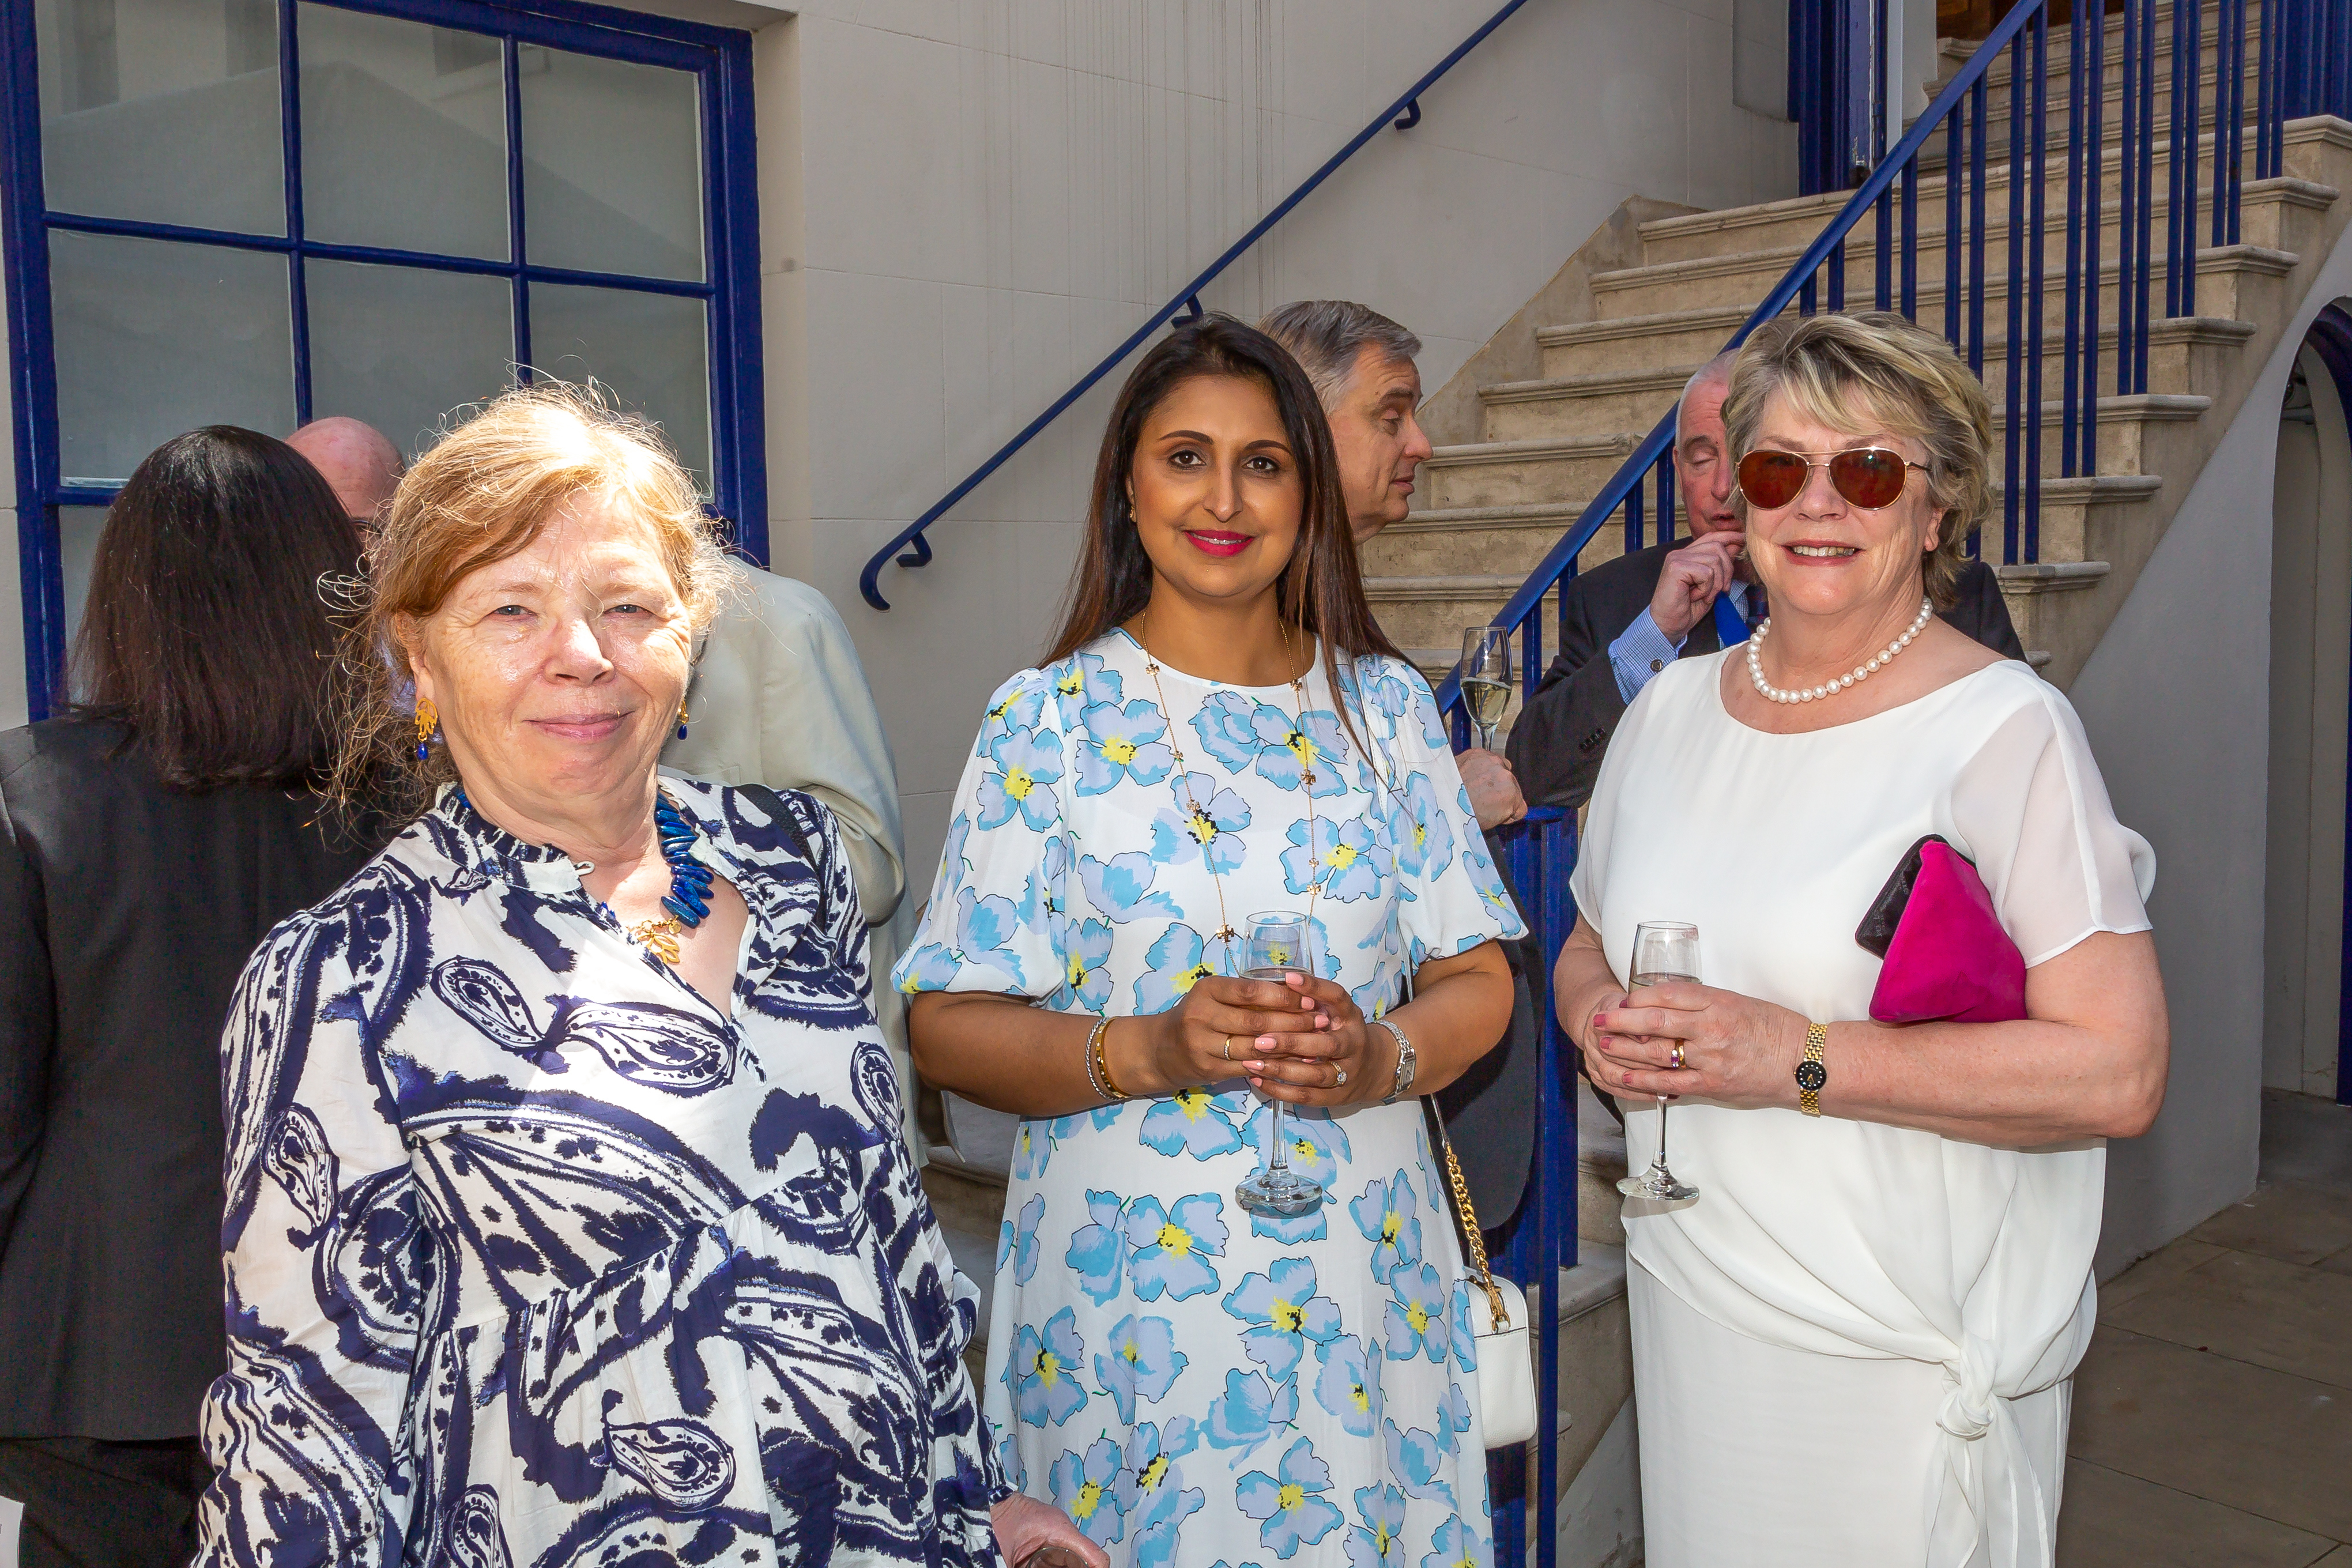 Three Liverymen (women of varying ages) dressed in Summer formal wear at the 2022 June Court Lunch held at Apothecaries' Hall.